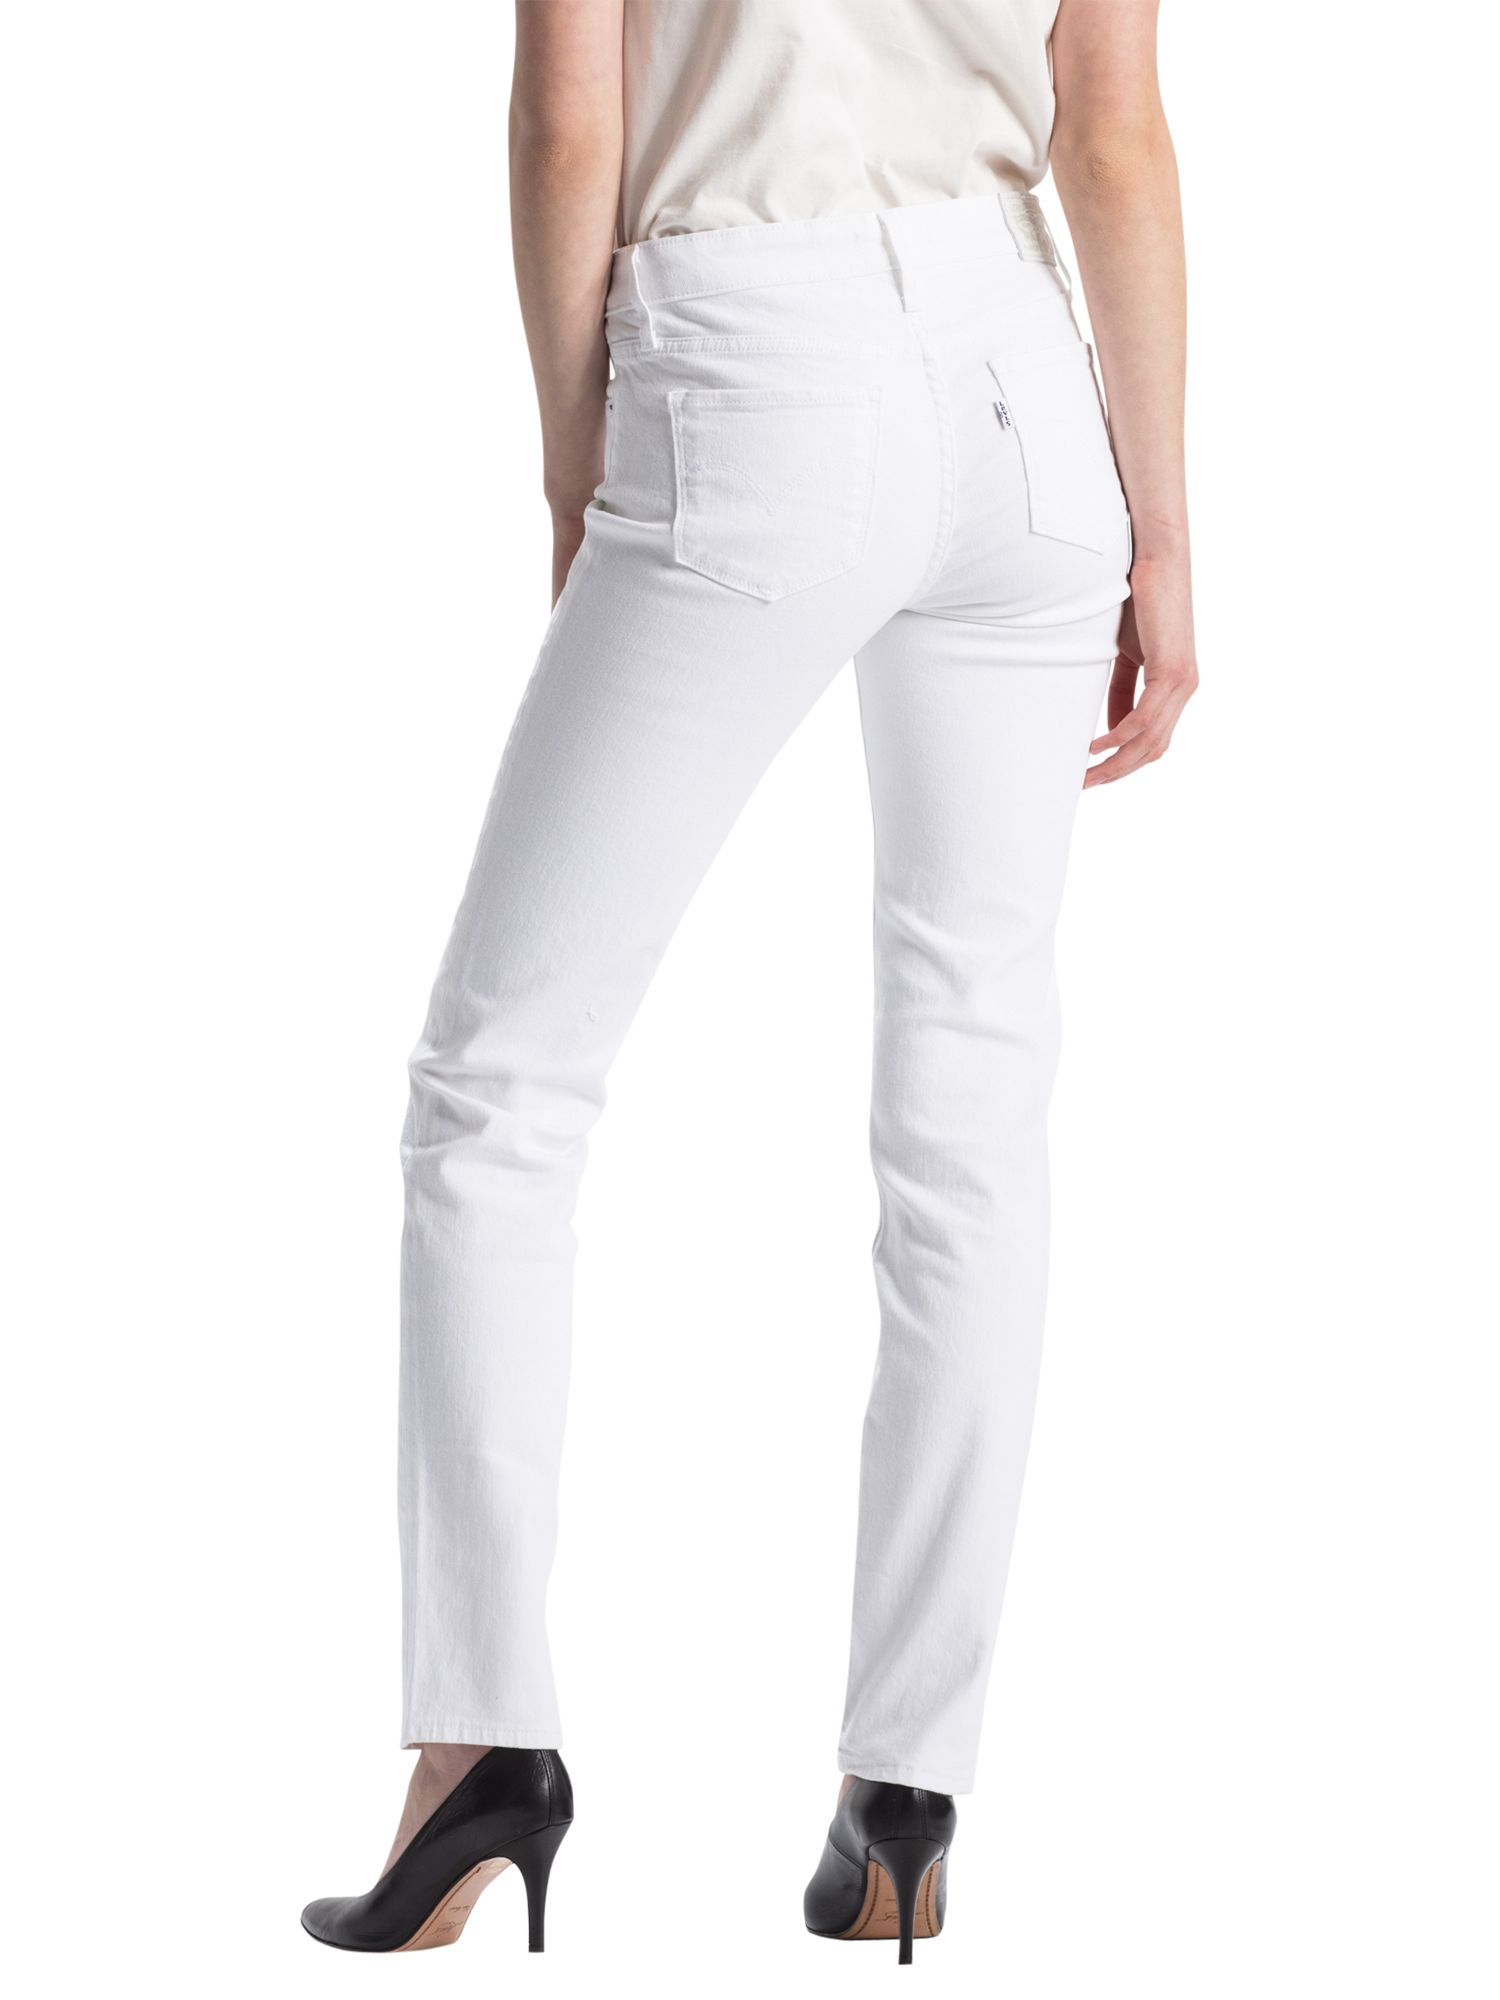 white jeans with white shoes